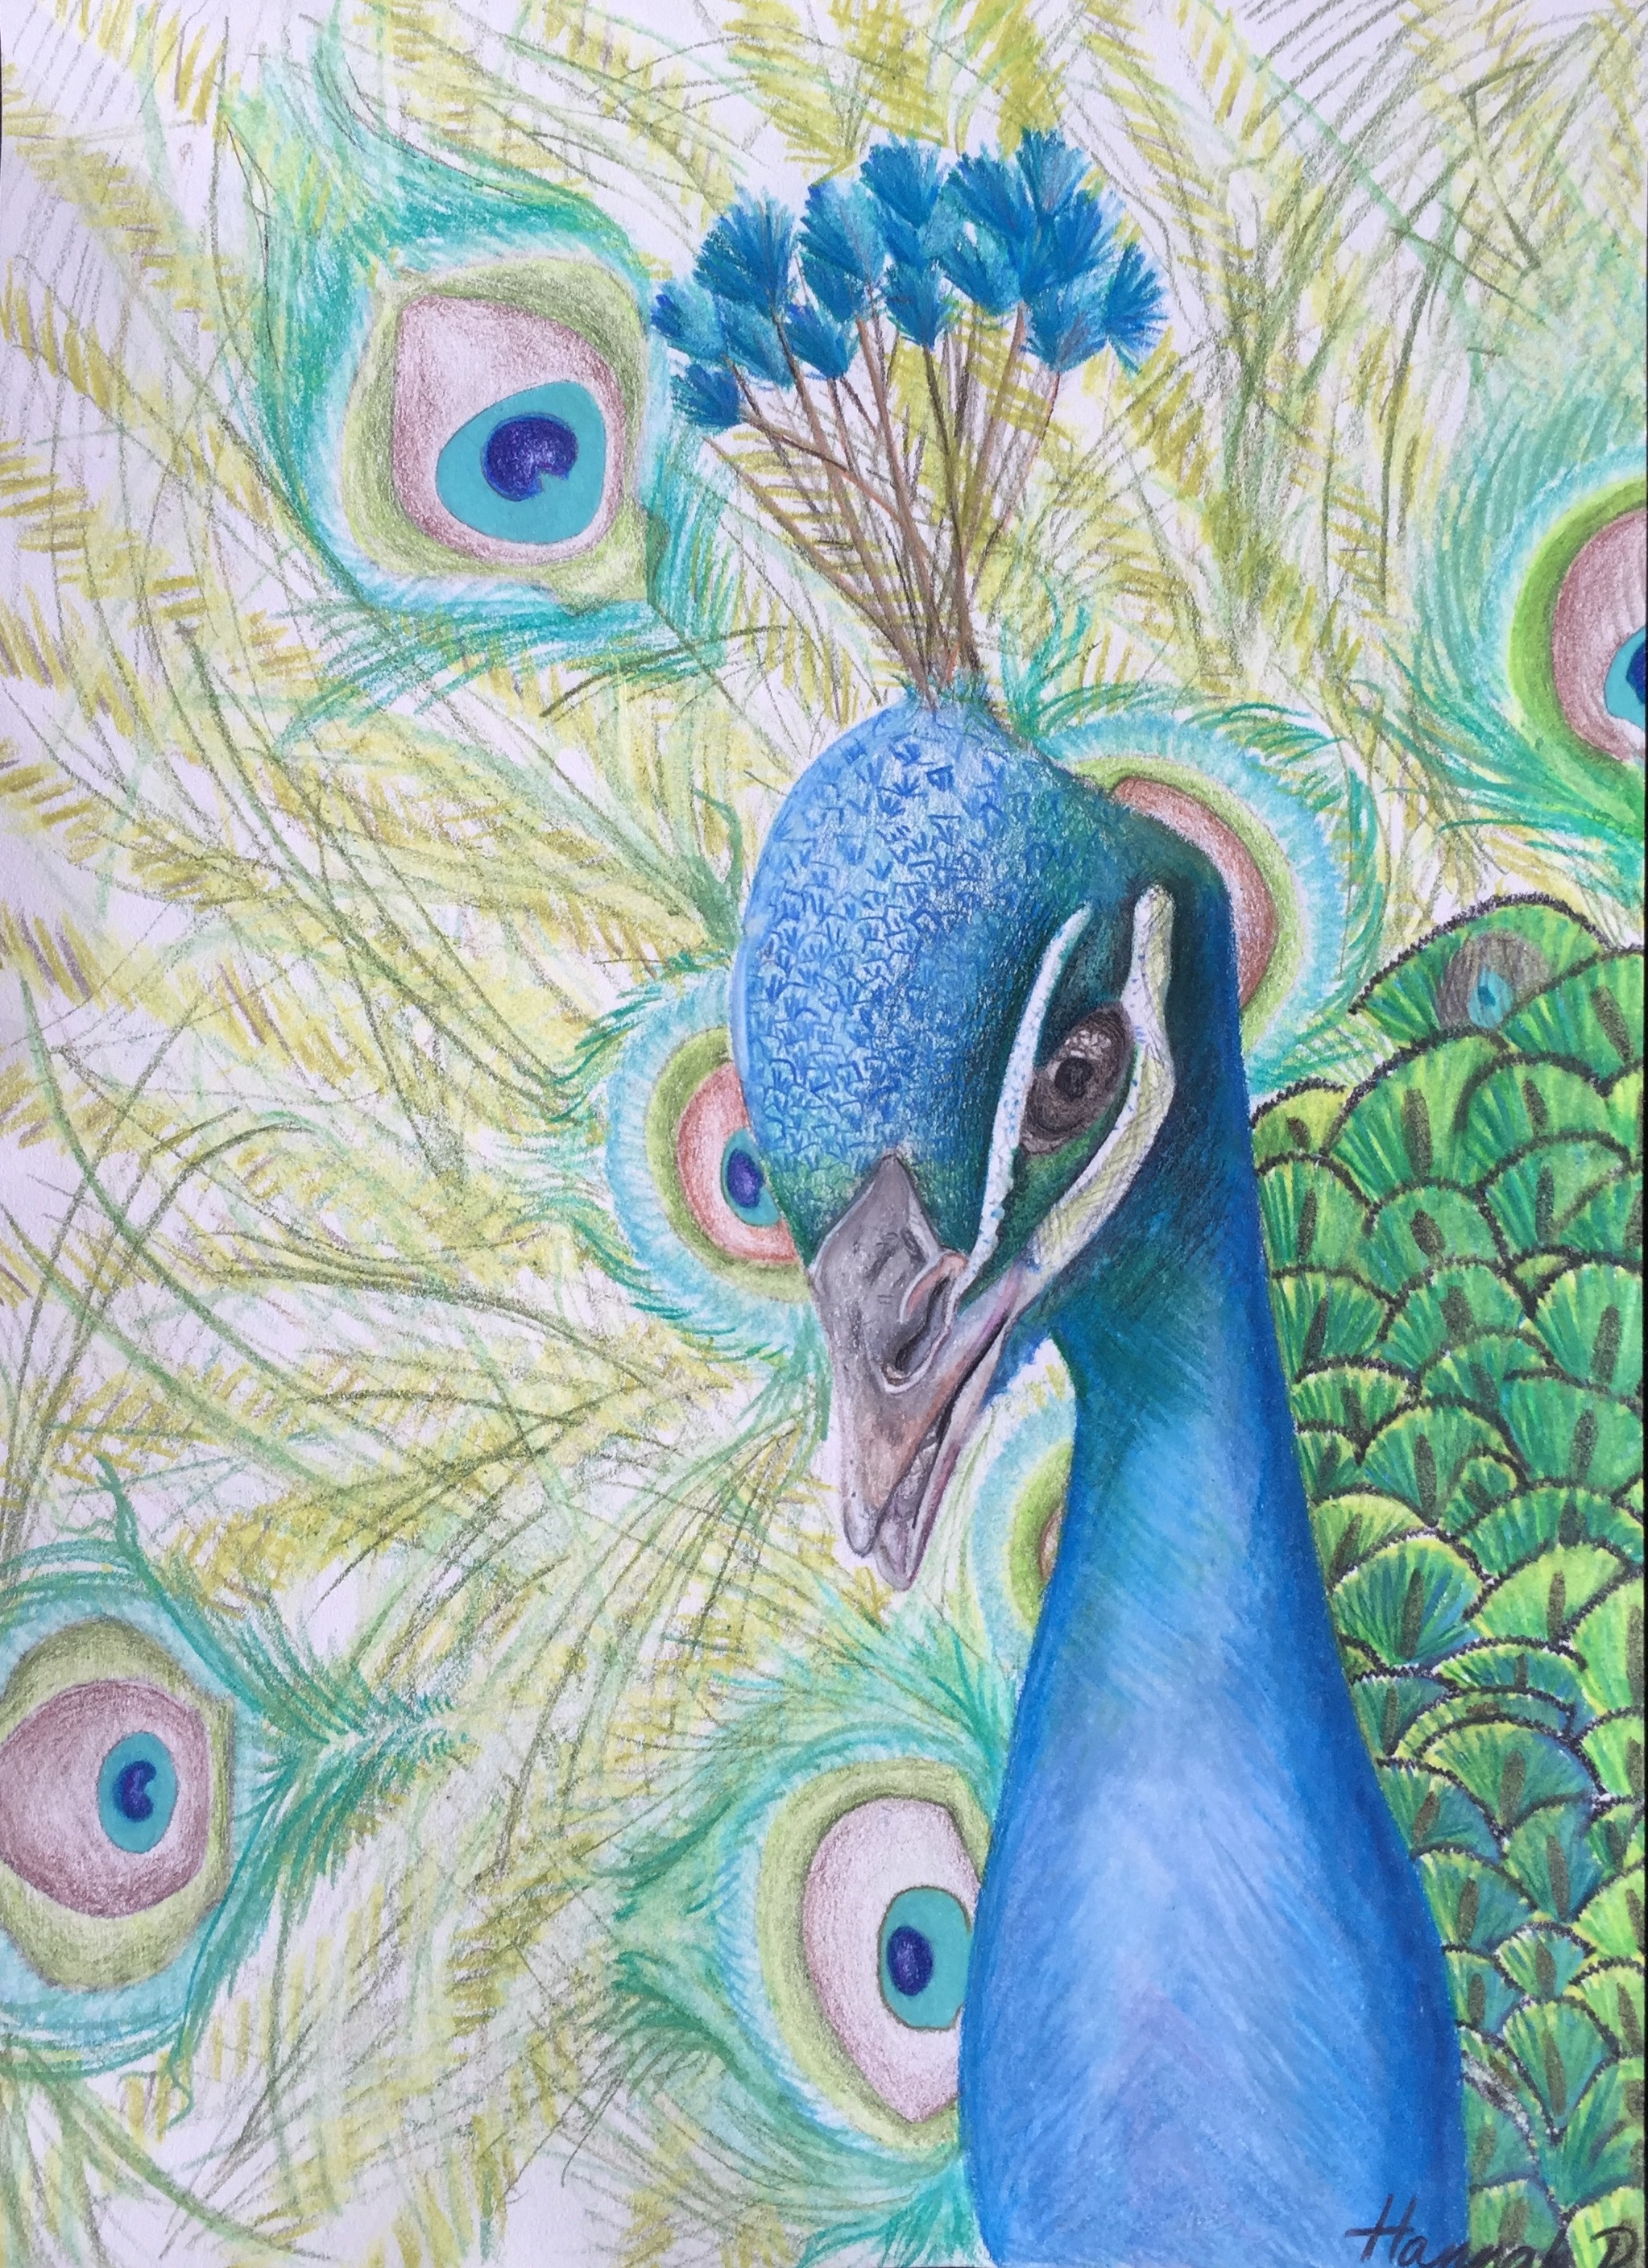 View Image Details Peacock in colored pencil by Hannah